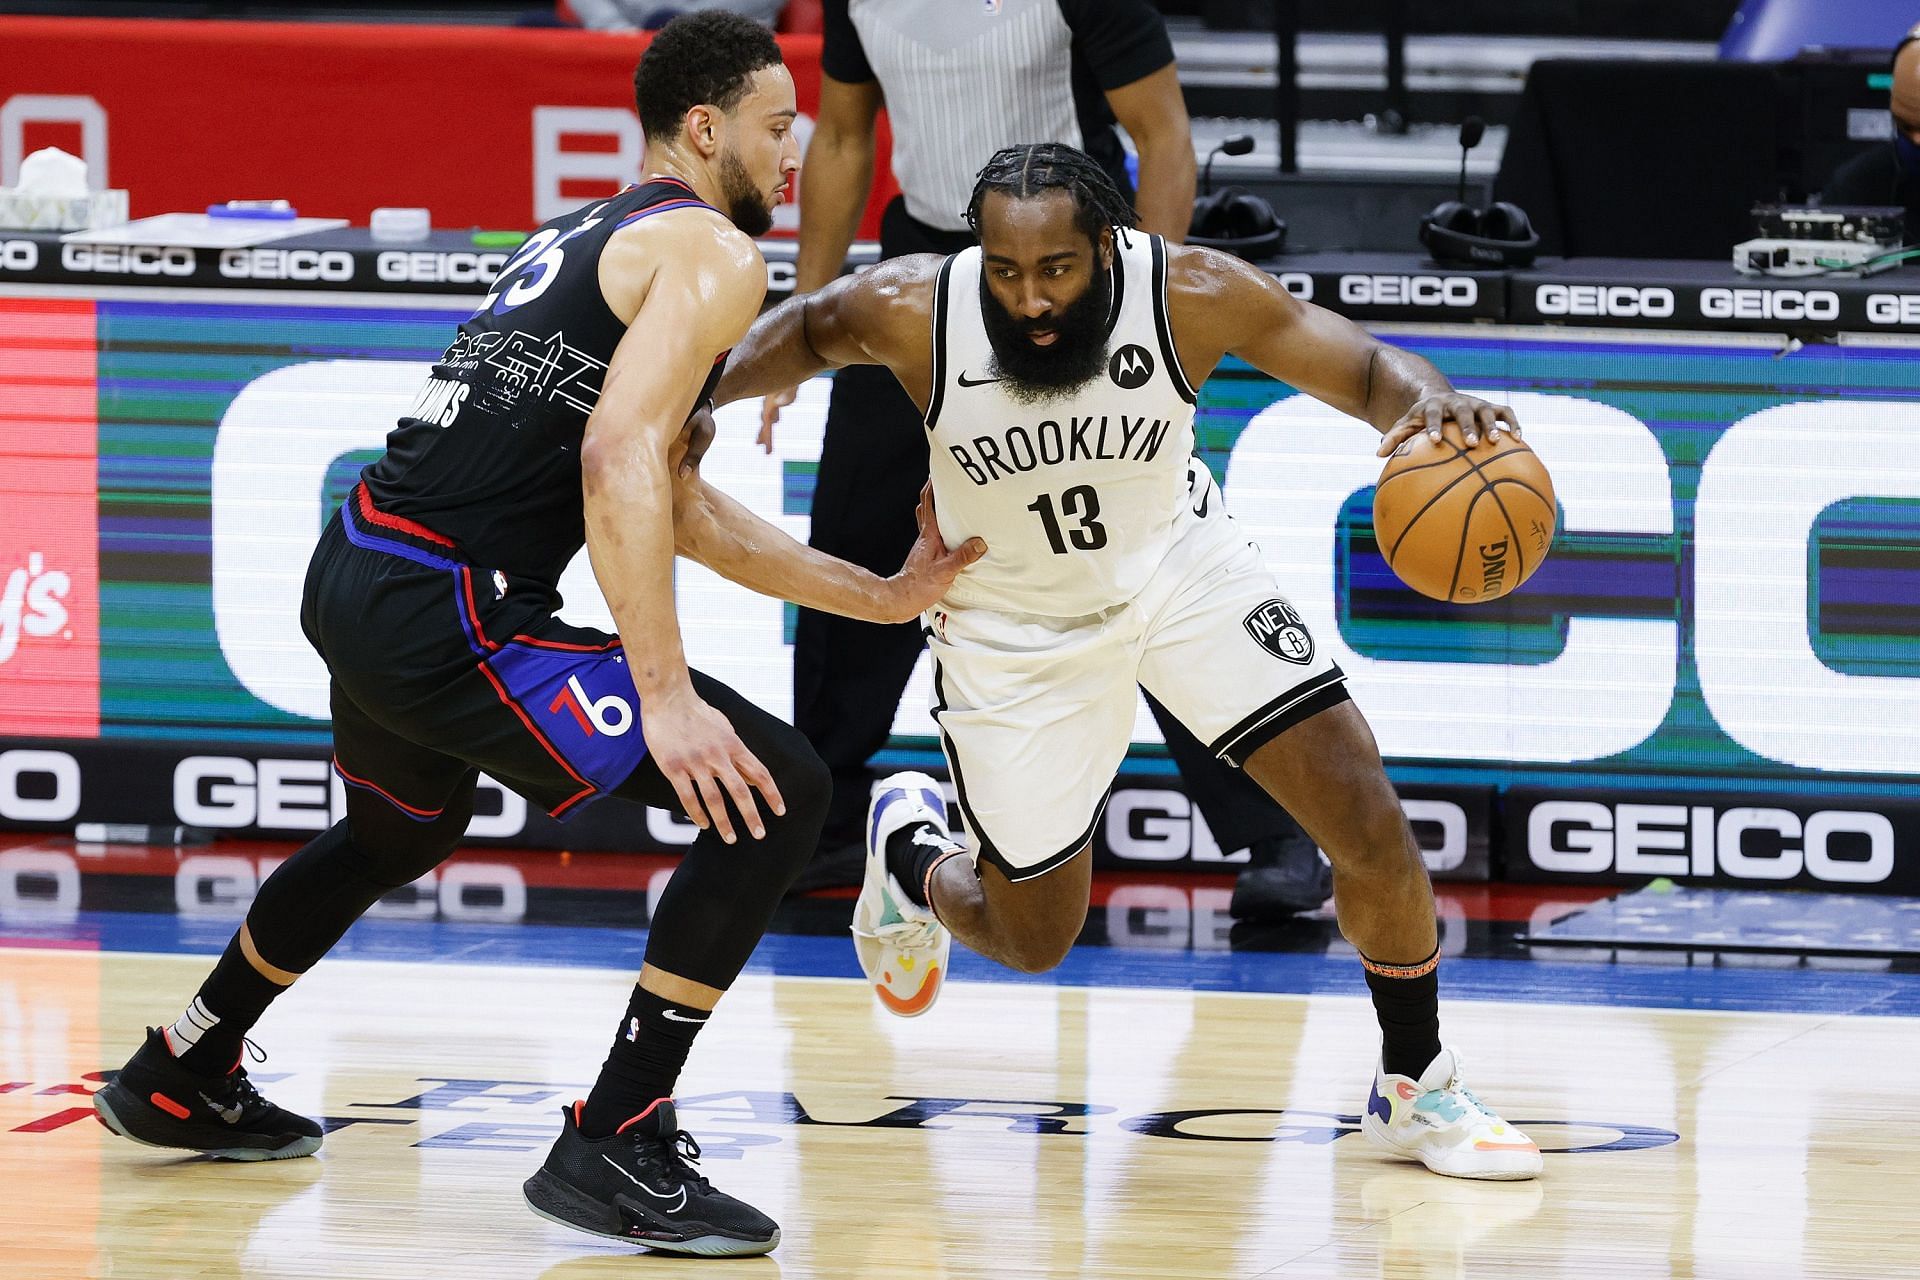 Ben Simmons (left) guarding James Harden in a game between the 76ers and the Nets.